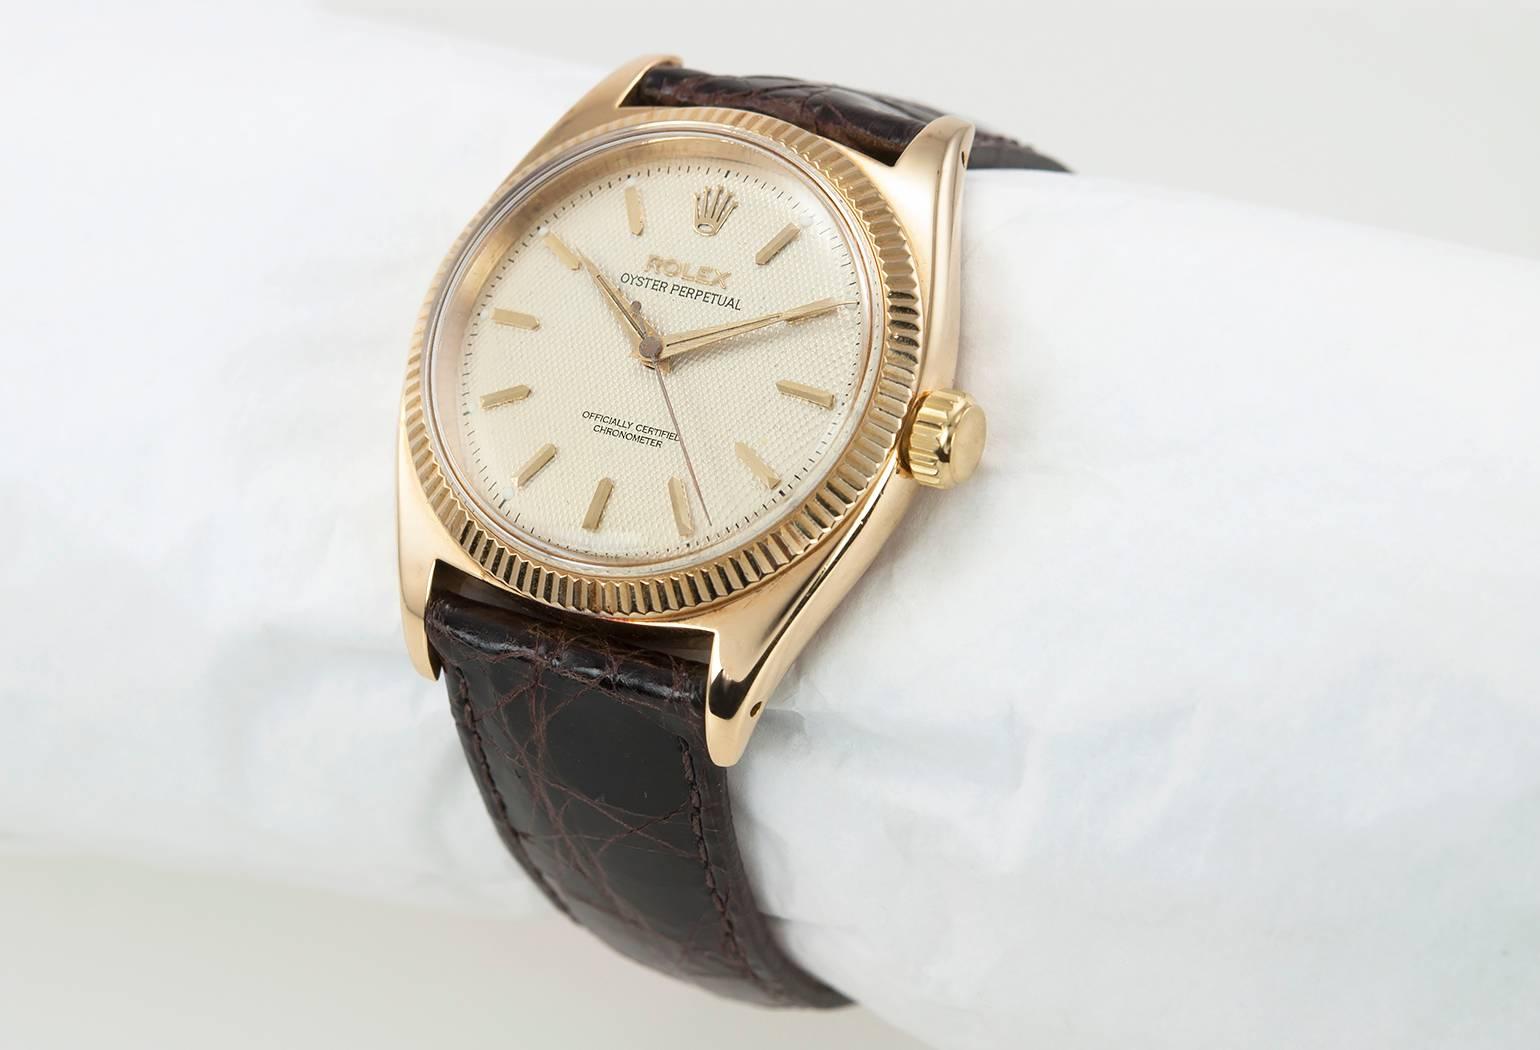 Rolex 18 karat yellow gold Oyster Perpetual wristwatch, reference  6503. This watch features a refinished textured silvered dial with baton style markers, fluted 18 karat yellow gold bezel,  plastic crystal, on a new brown leather strap.  Circa